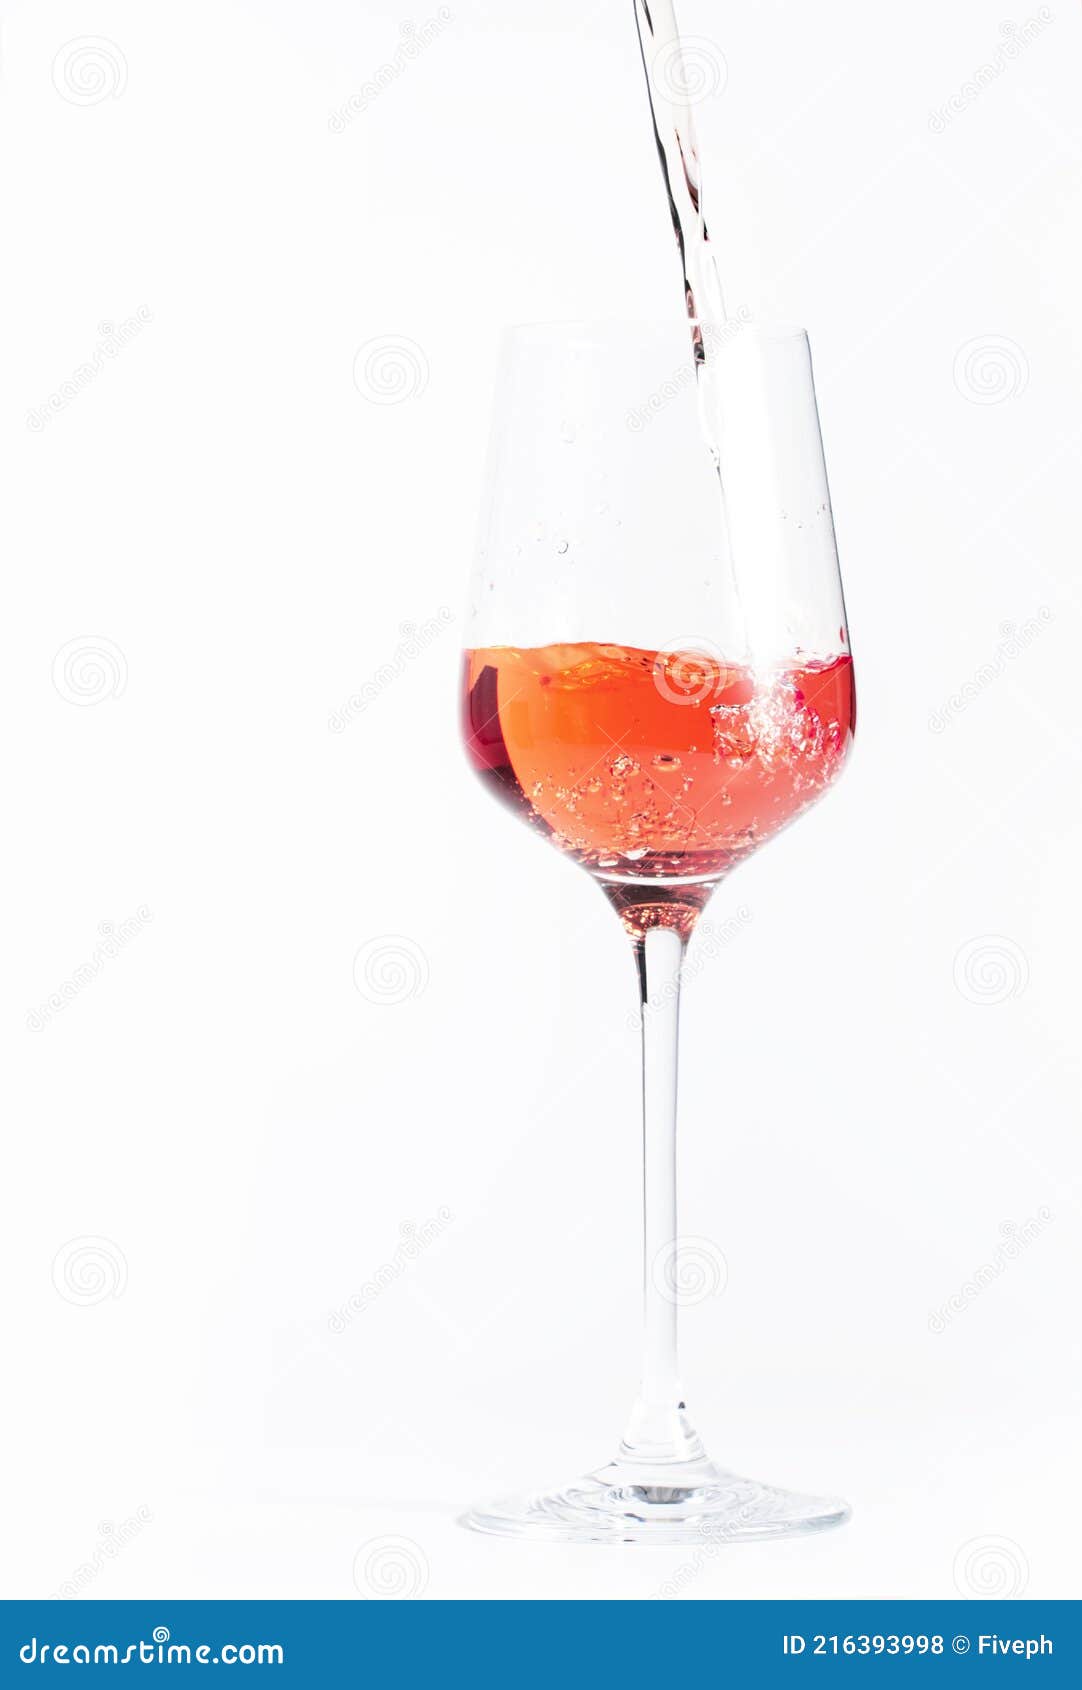 rose wine pouring out of the bottle, white bakcground. rosado, rosato or blush wine tasting in wineshop, bar concept. copy space